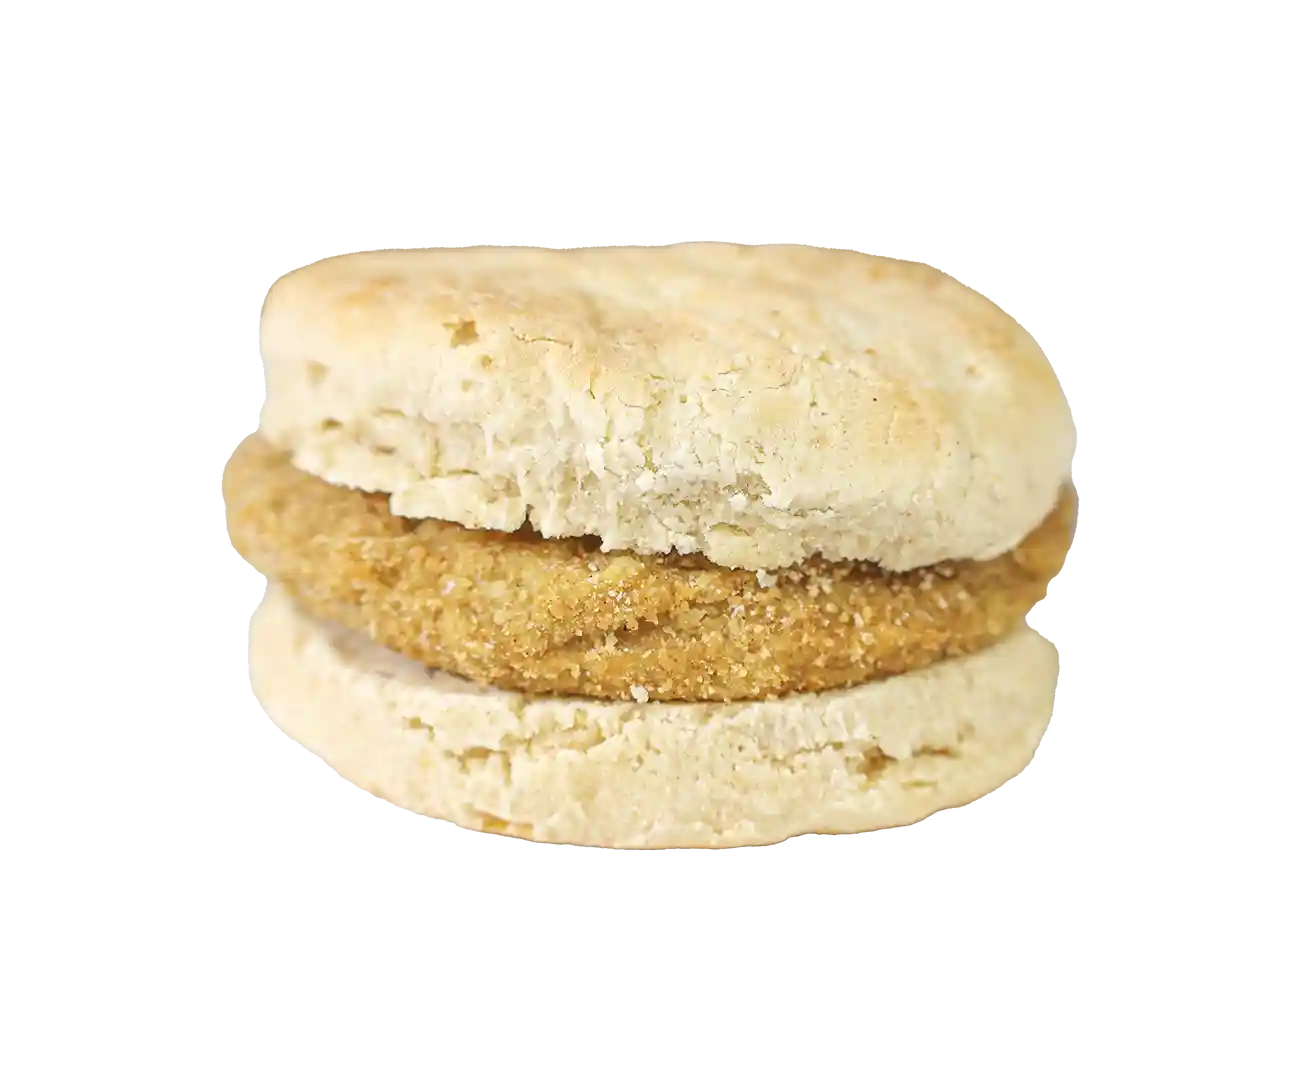 Tyson® Fully Cooked Whole Grain Breaded Chicken Patty on a Whole Grain Biscuit, 100/3.15 oz._image_11